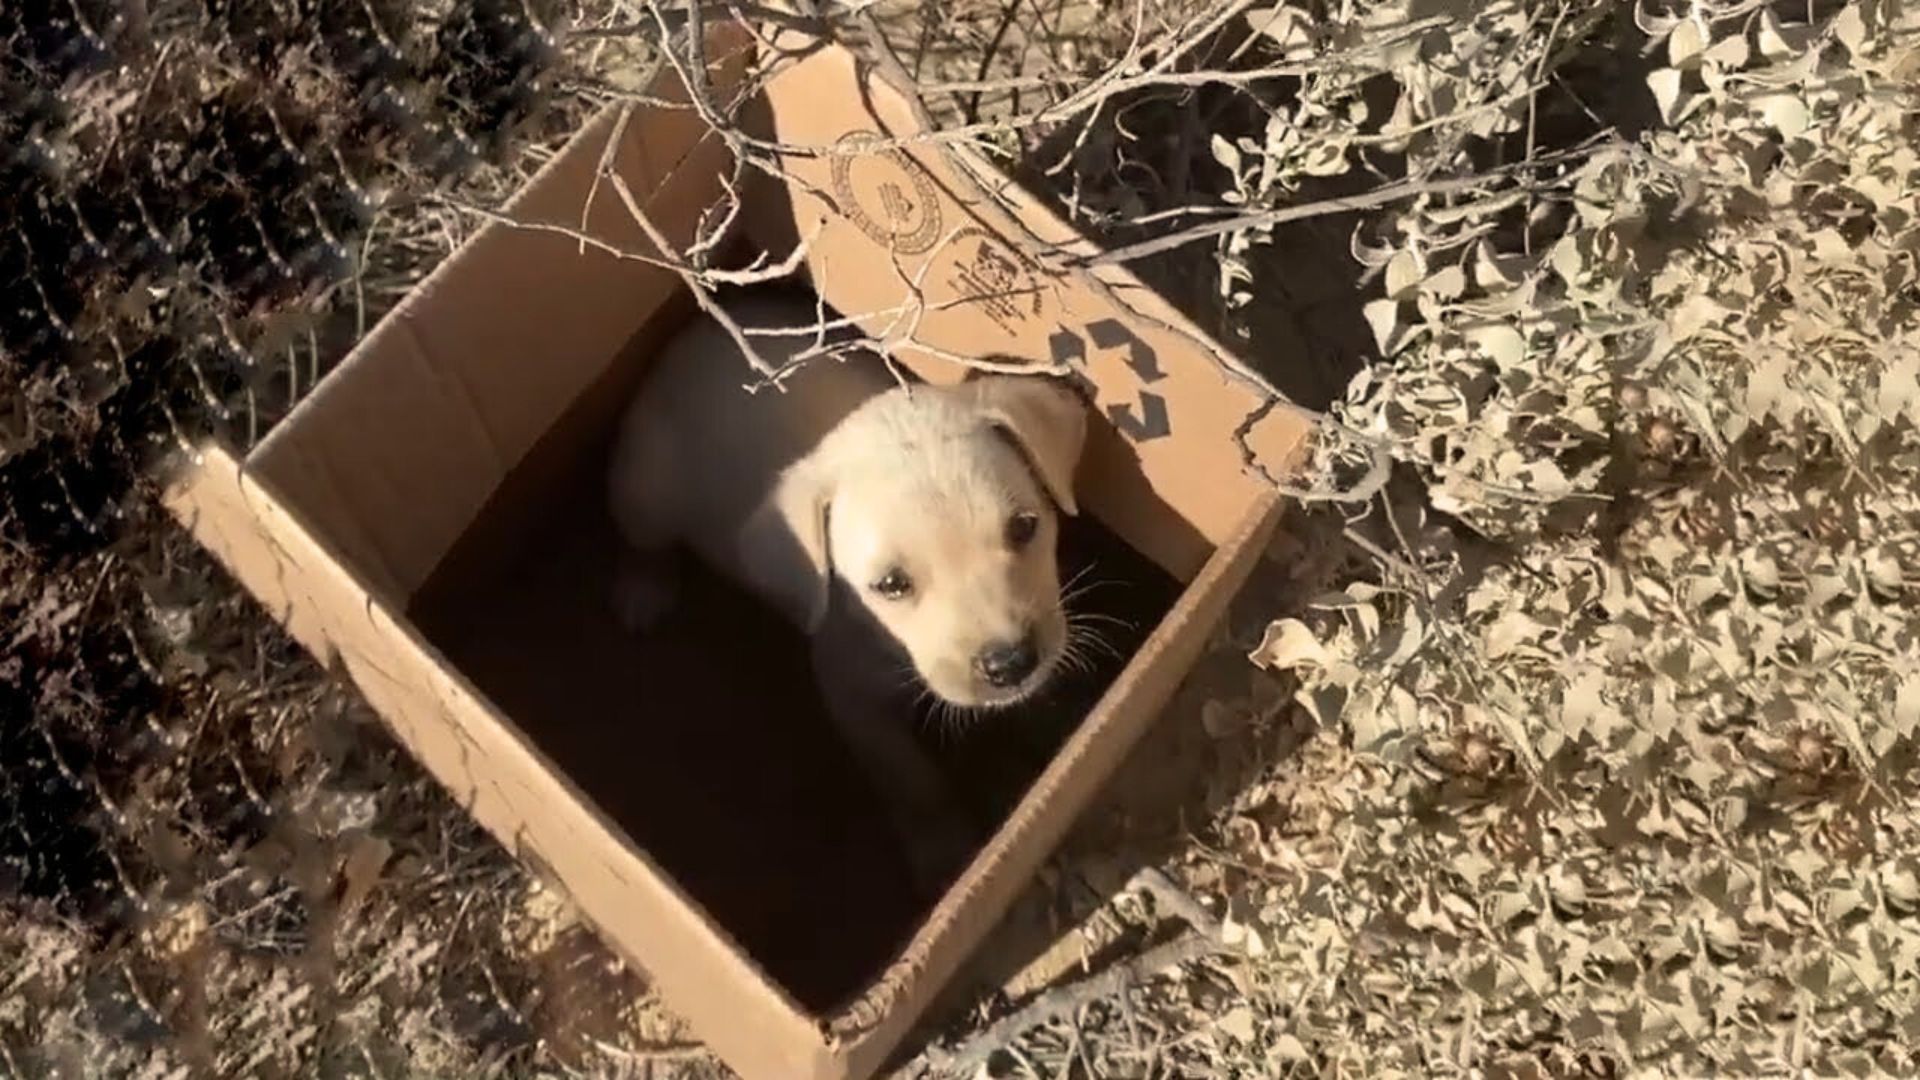 Volunteers Find A Crying Puppy Who Was Separated From His Mom And Dumped On The Railroad Tracks